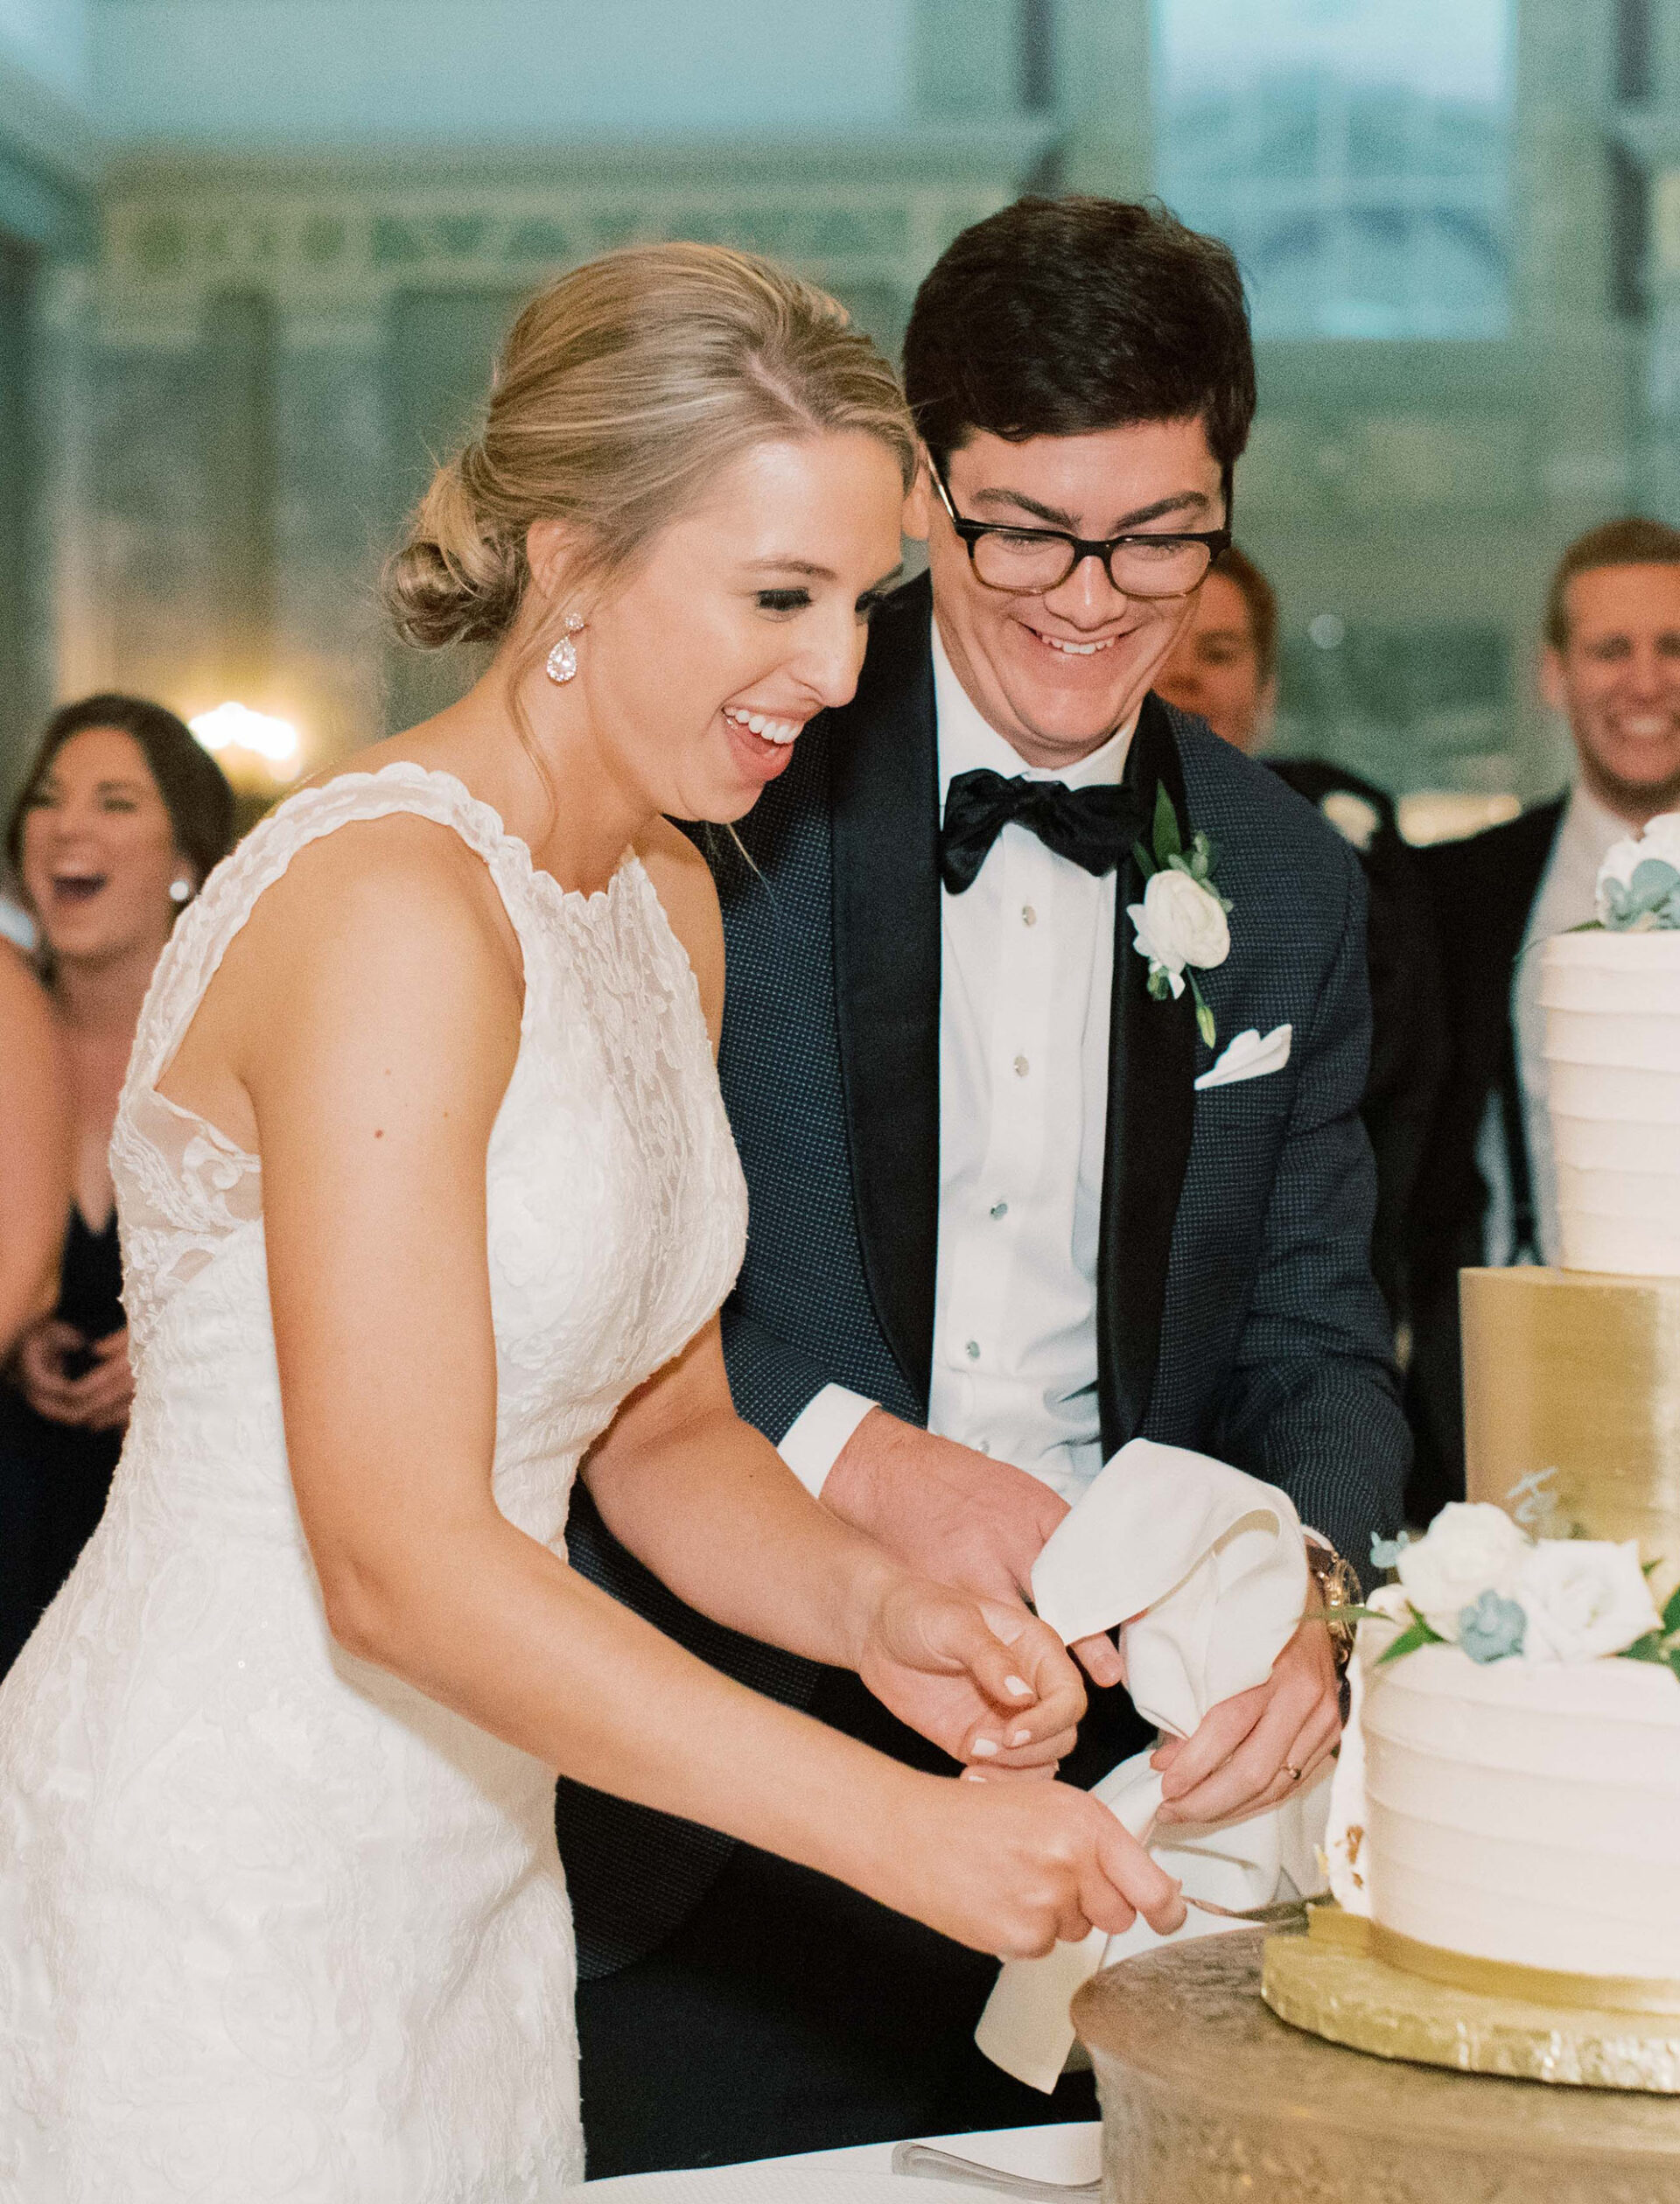 Close up of a woman and man cutting their wedding cake in a soaring ballroom